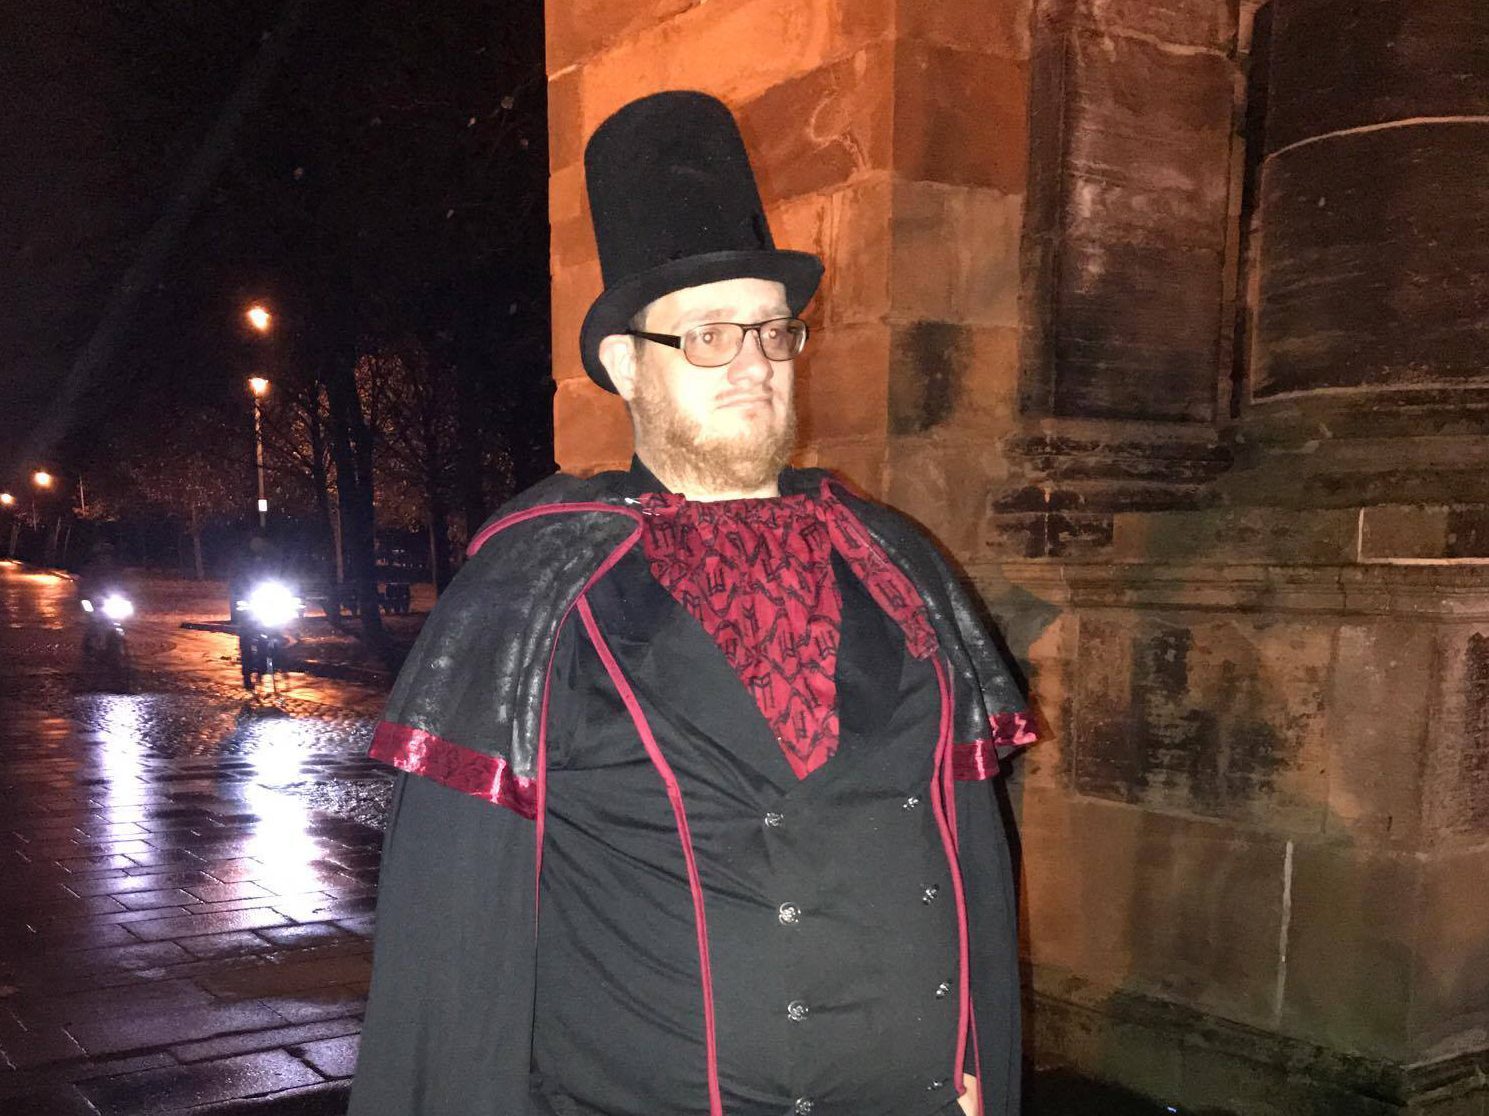 Alex Bulloch runs tours called the Glasgow Ghost Walk using the false name of Alex McGlumphy on social media – a breach of strict rules.